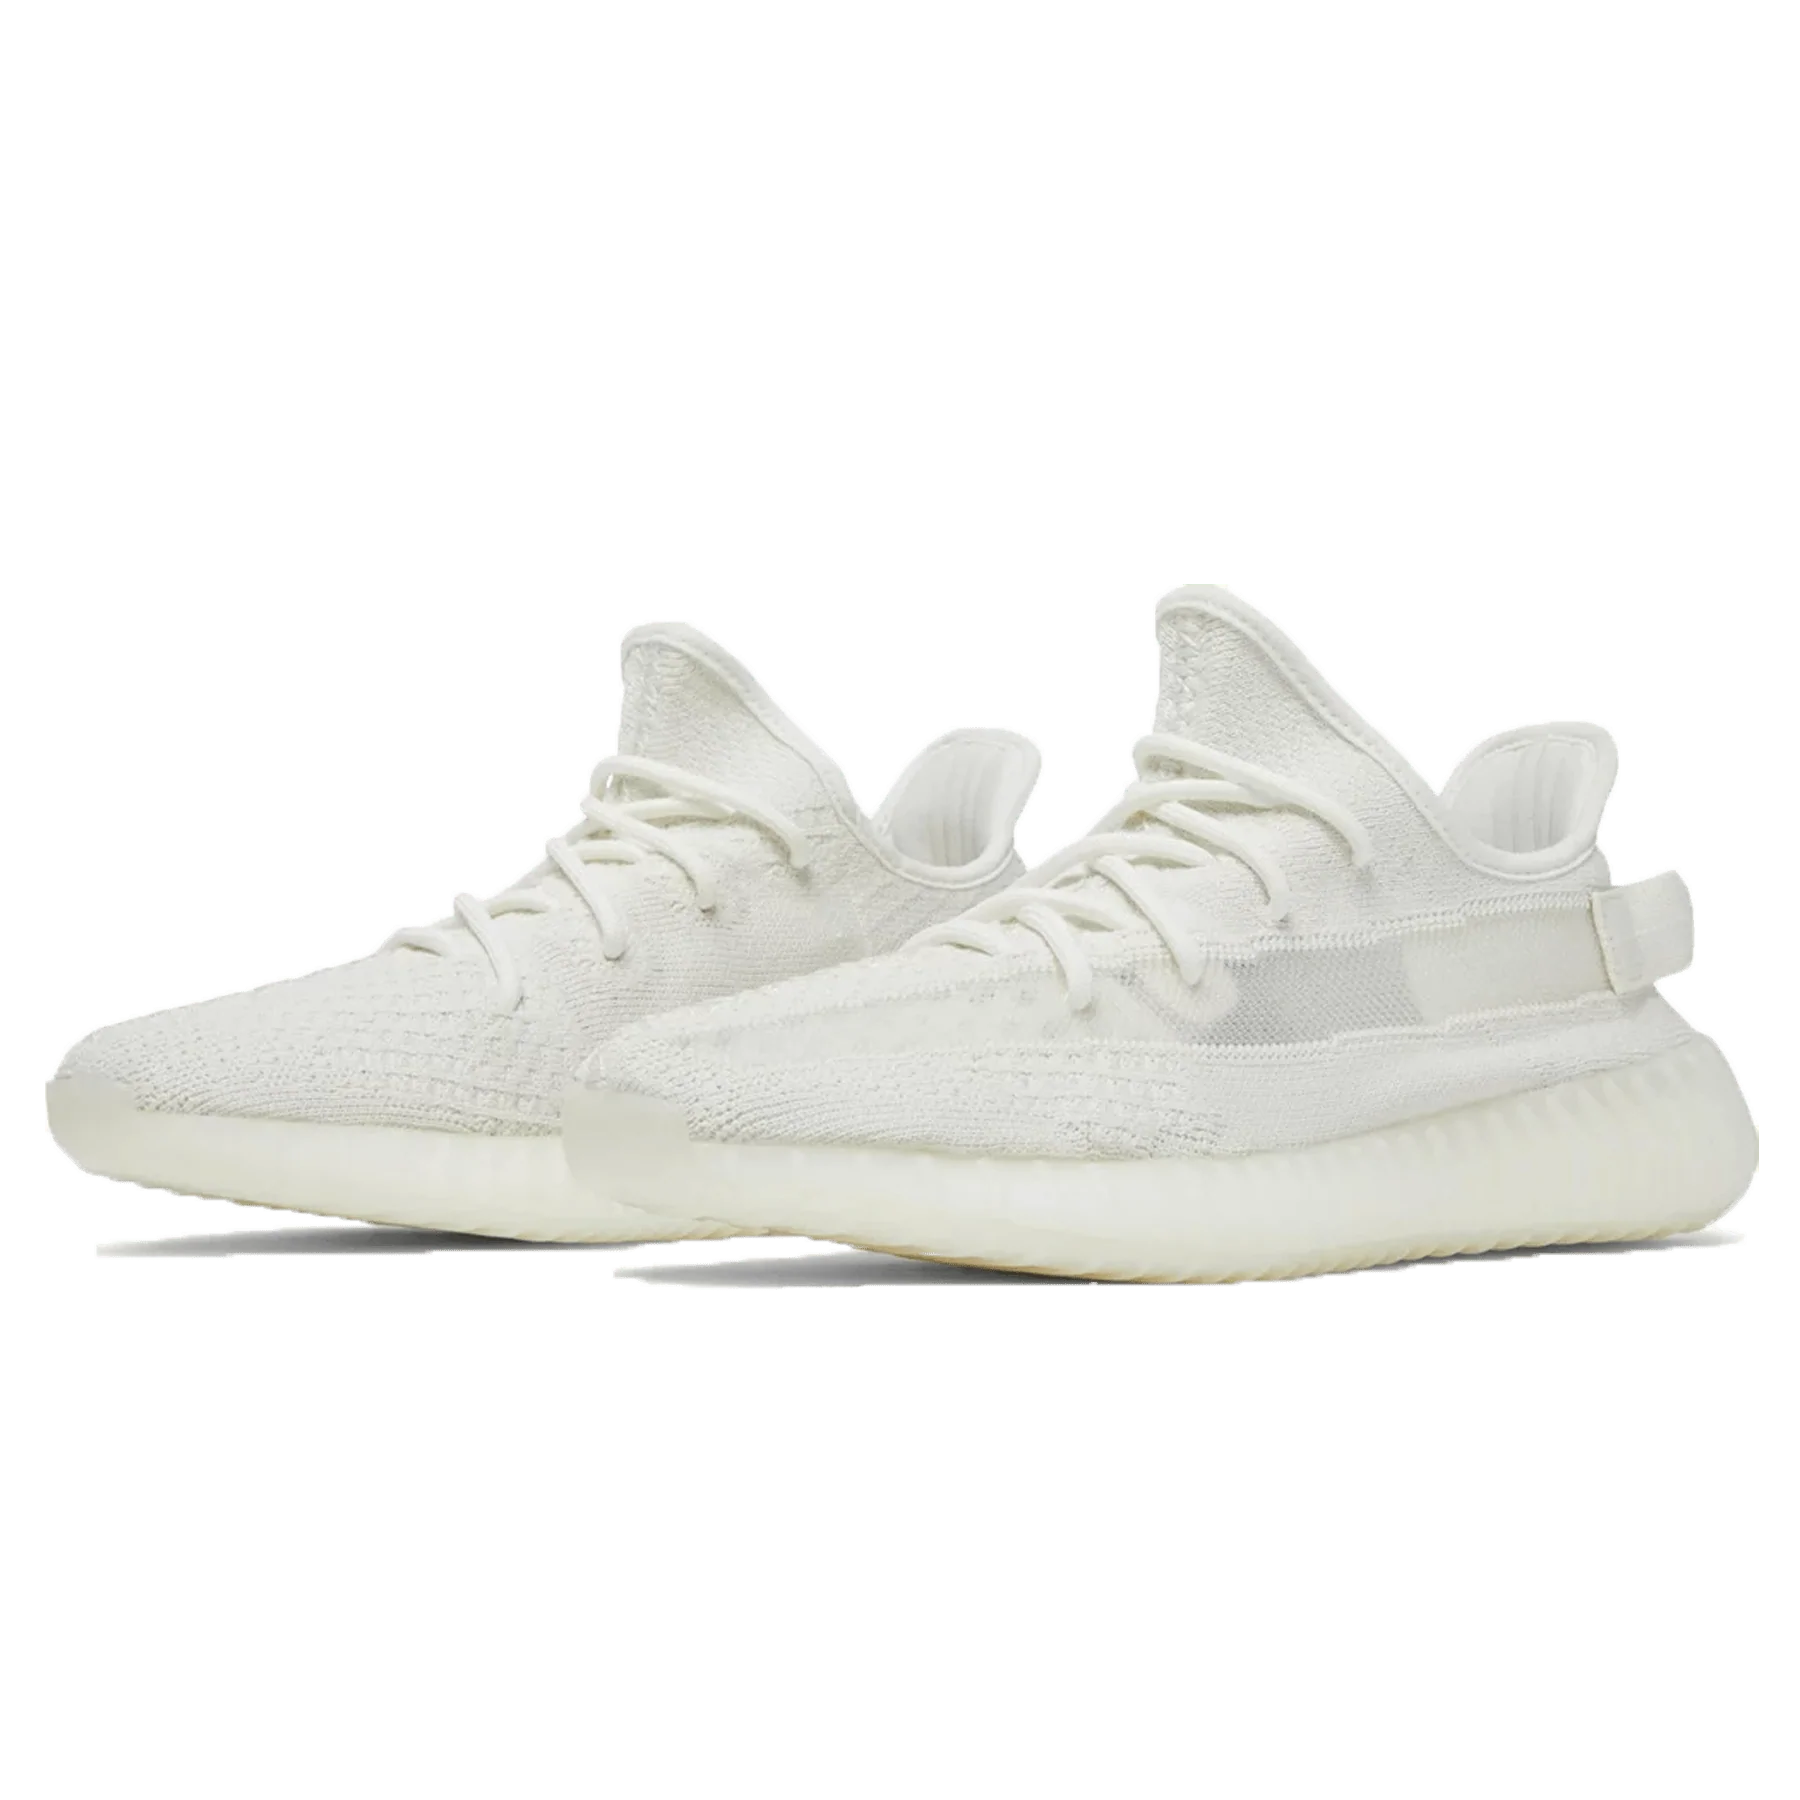 Double Boxed  339.99 adidas Yeezy Boost 350 V2 Bone White Double Boxed